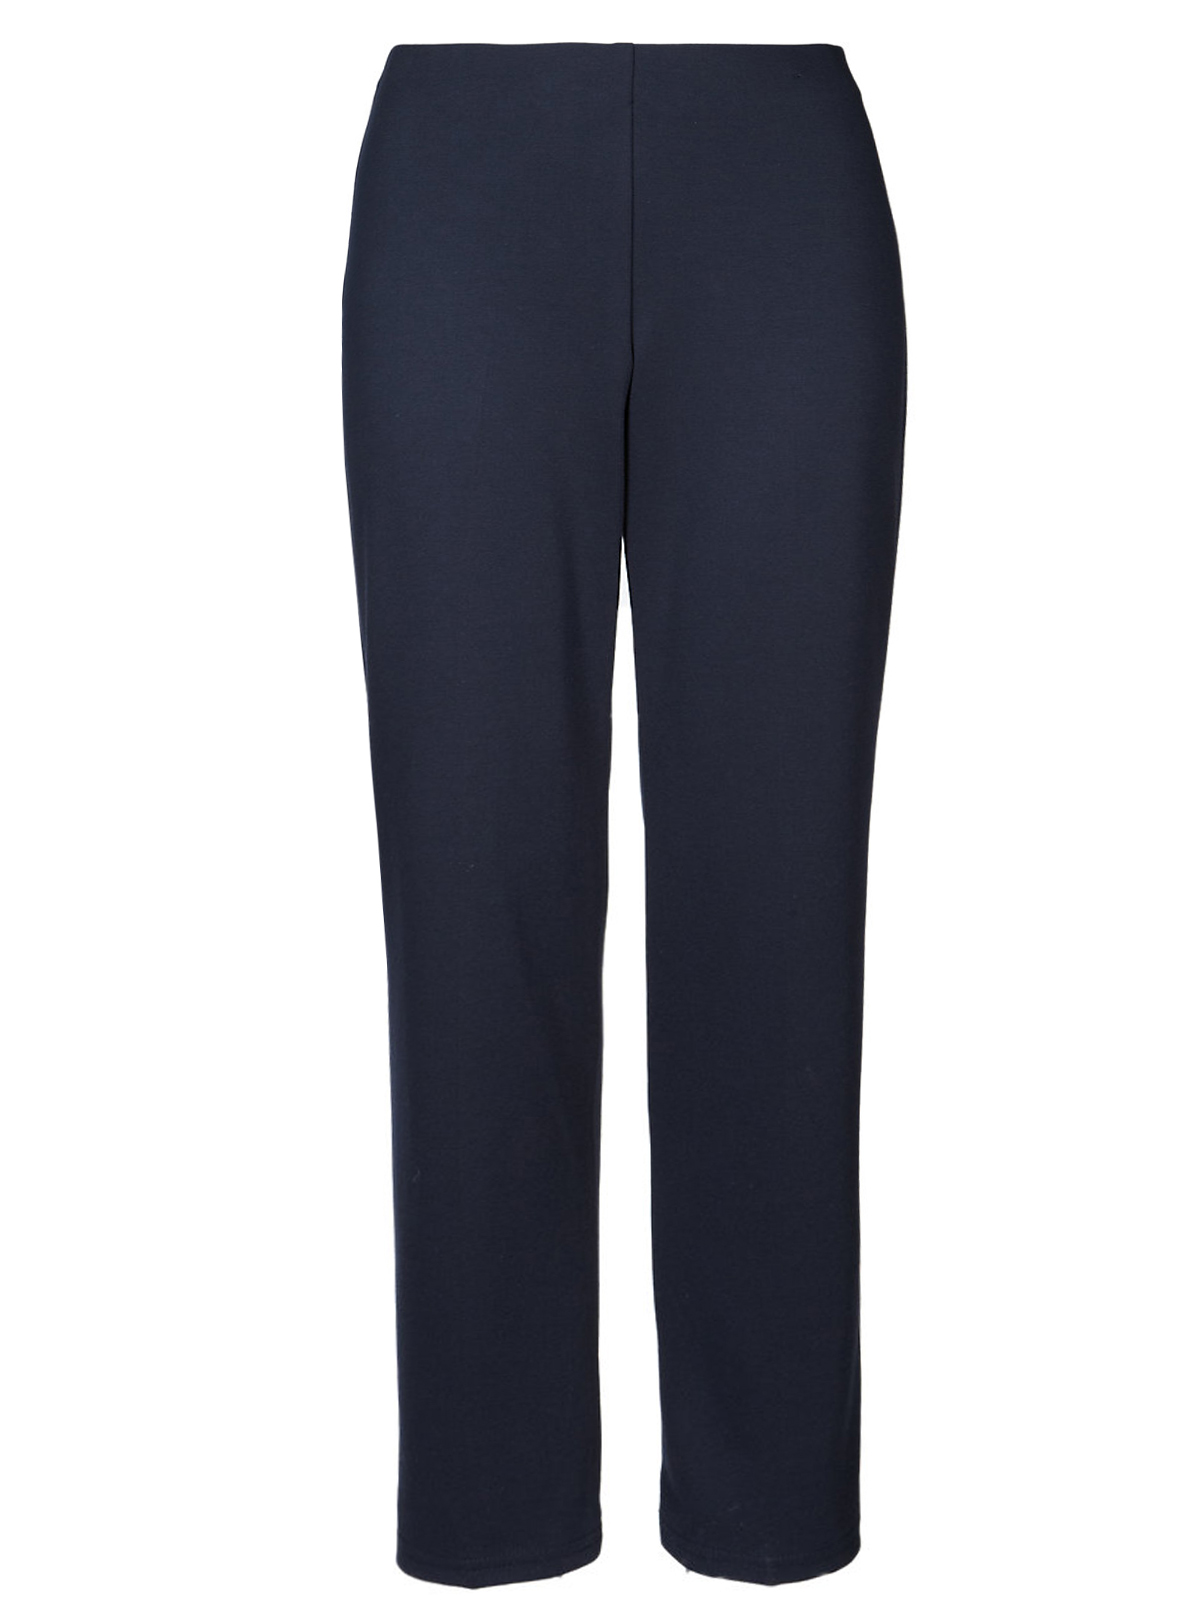 Marks and Spencer - - M&5 ASSORTED Ladies Trousers - Size 6 to 18